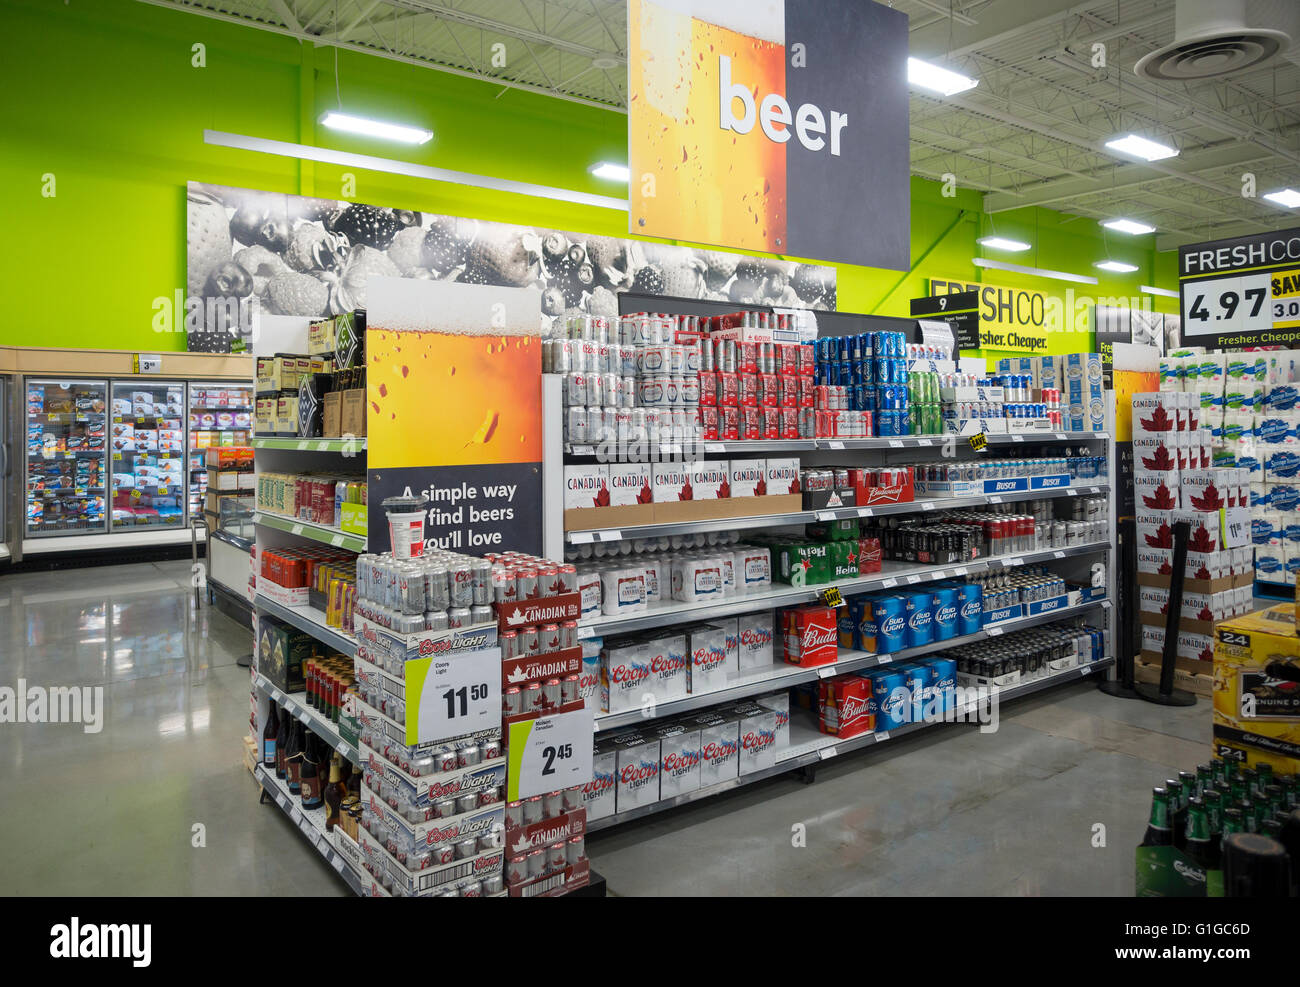 Beer being sold for the first time in supermakets within the province of Ontario. Freshco, Oakville, Ontario, Canada. Stock Photo